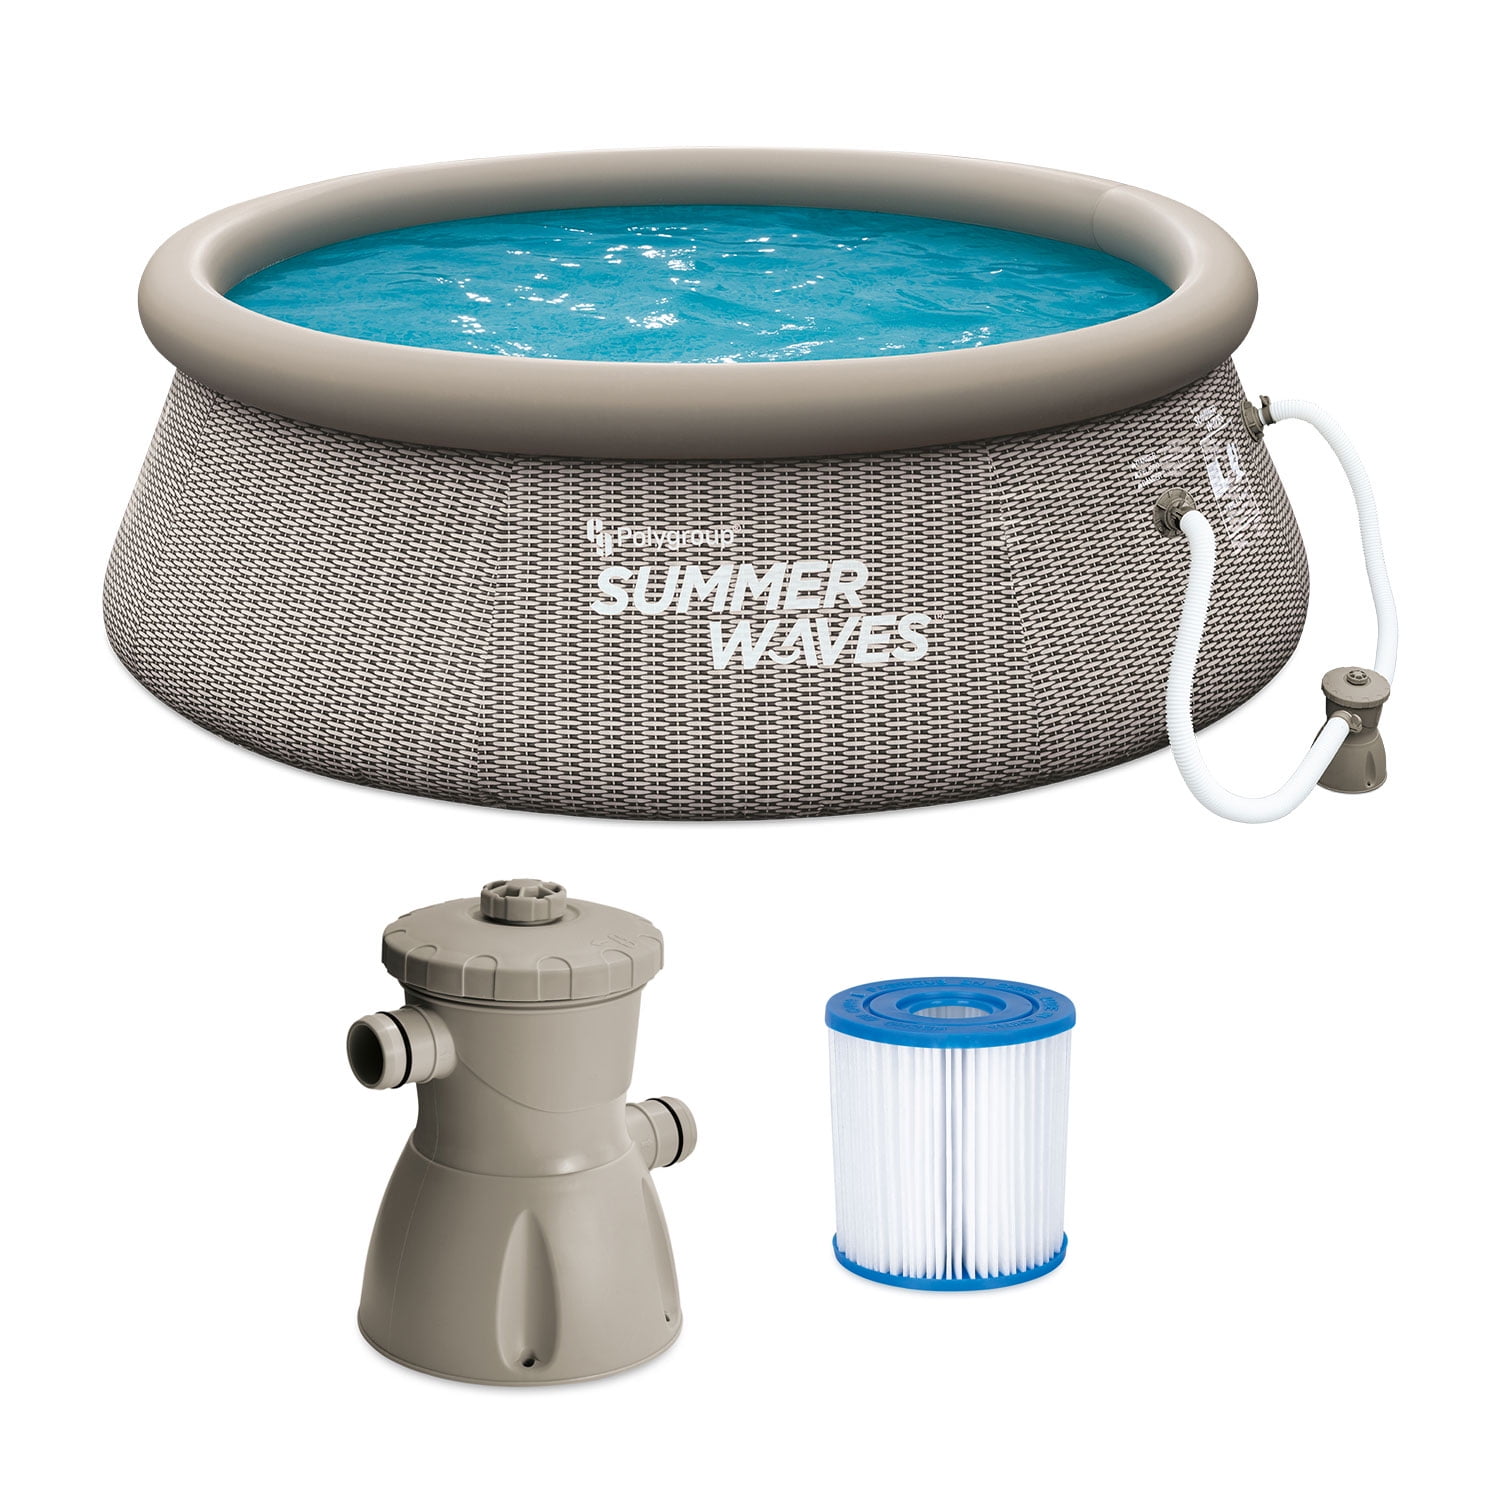 Summer Waves P1B00830A 8ft x 30in Round Quick Set Inflatable Ring Above Ground Swimming Pool with Filter Pump Gray Basketweave Print 